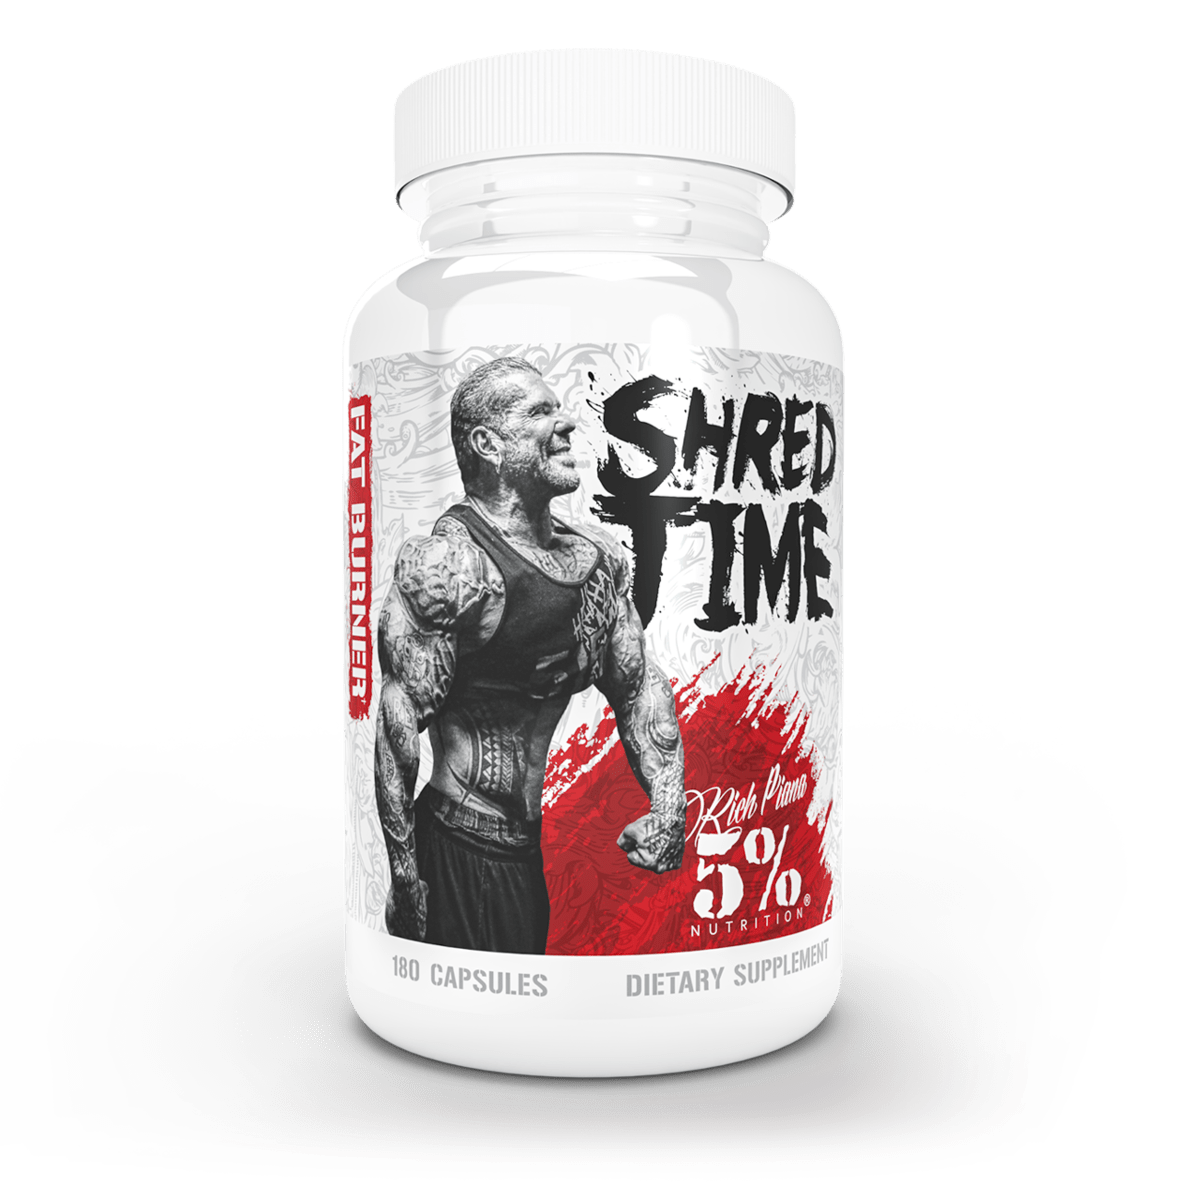 Rich Piana 5% Nutrition  Shred Time 180 шт. / 30 servings,  ml, Rich Piana 5%. Fat Burner. Weight Loss Fat burning 